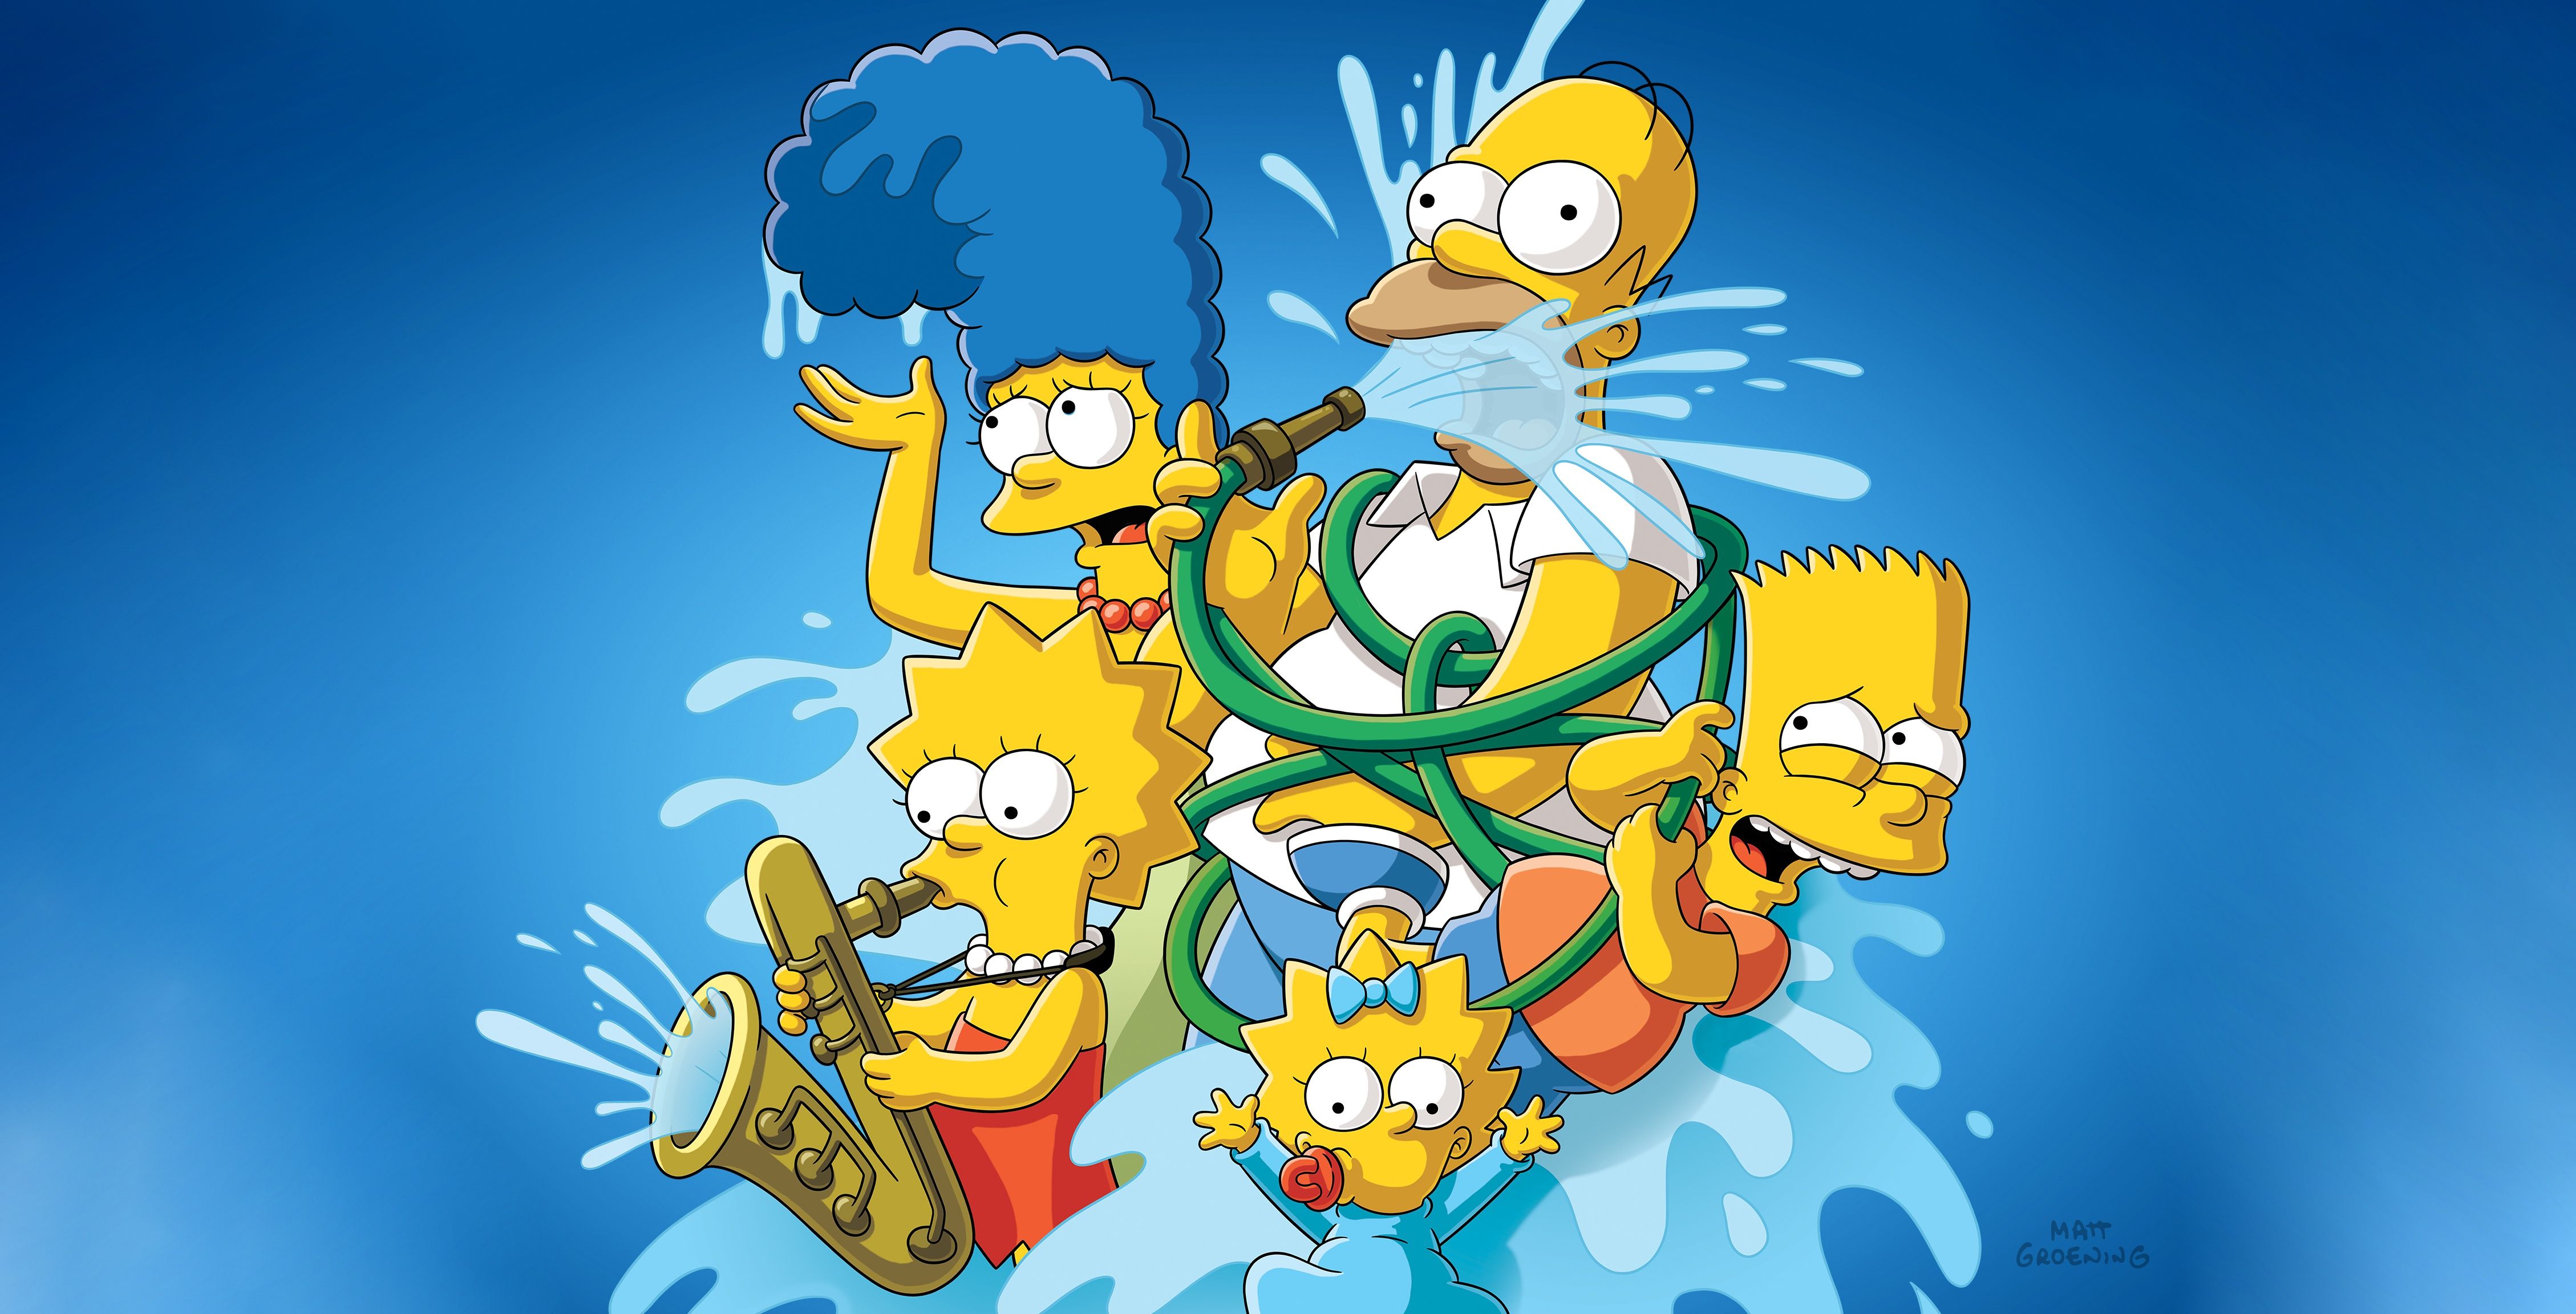 The simpsons are in a blue background with water - The Simpsons, Bart Simpson, Lisa Simpson